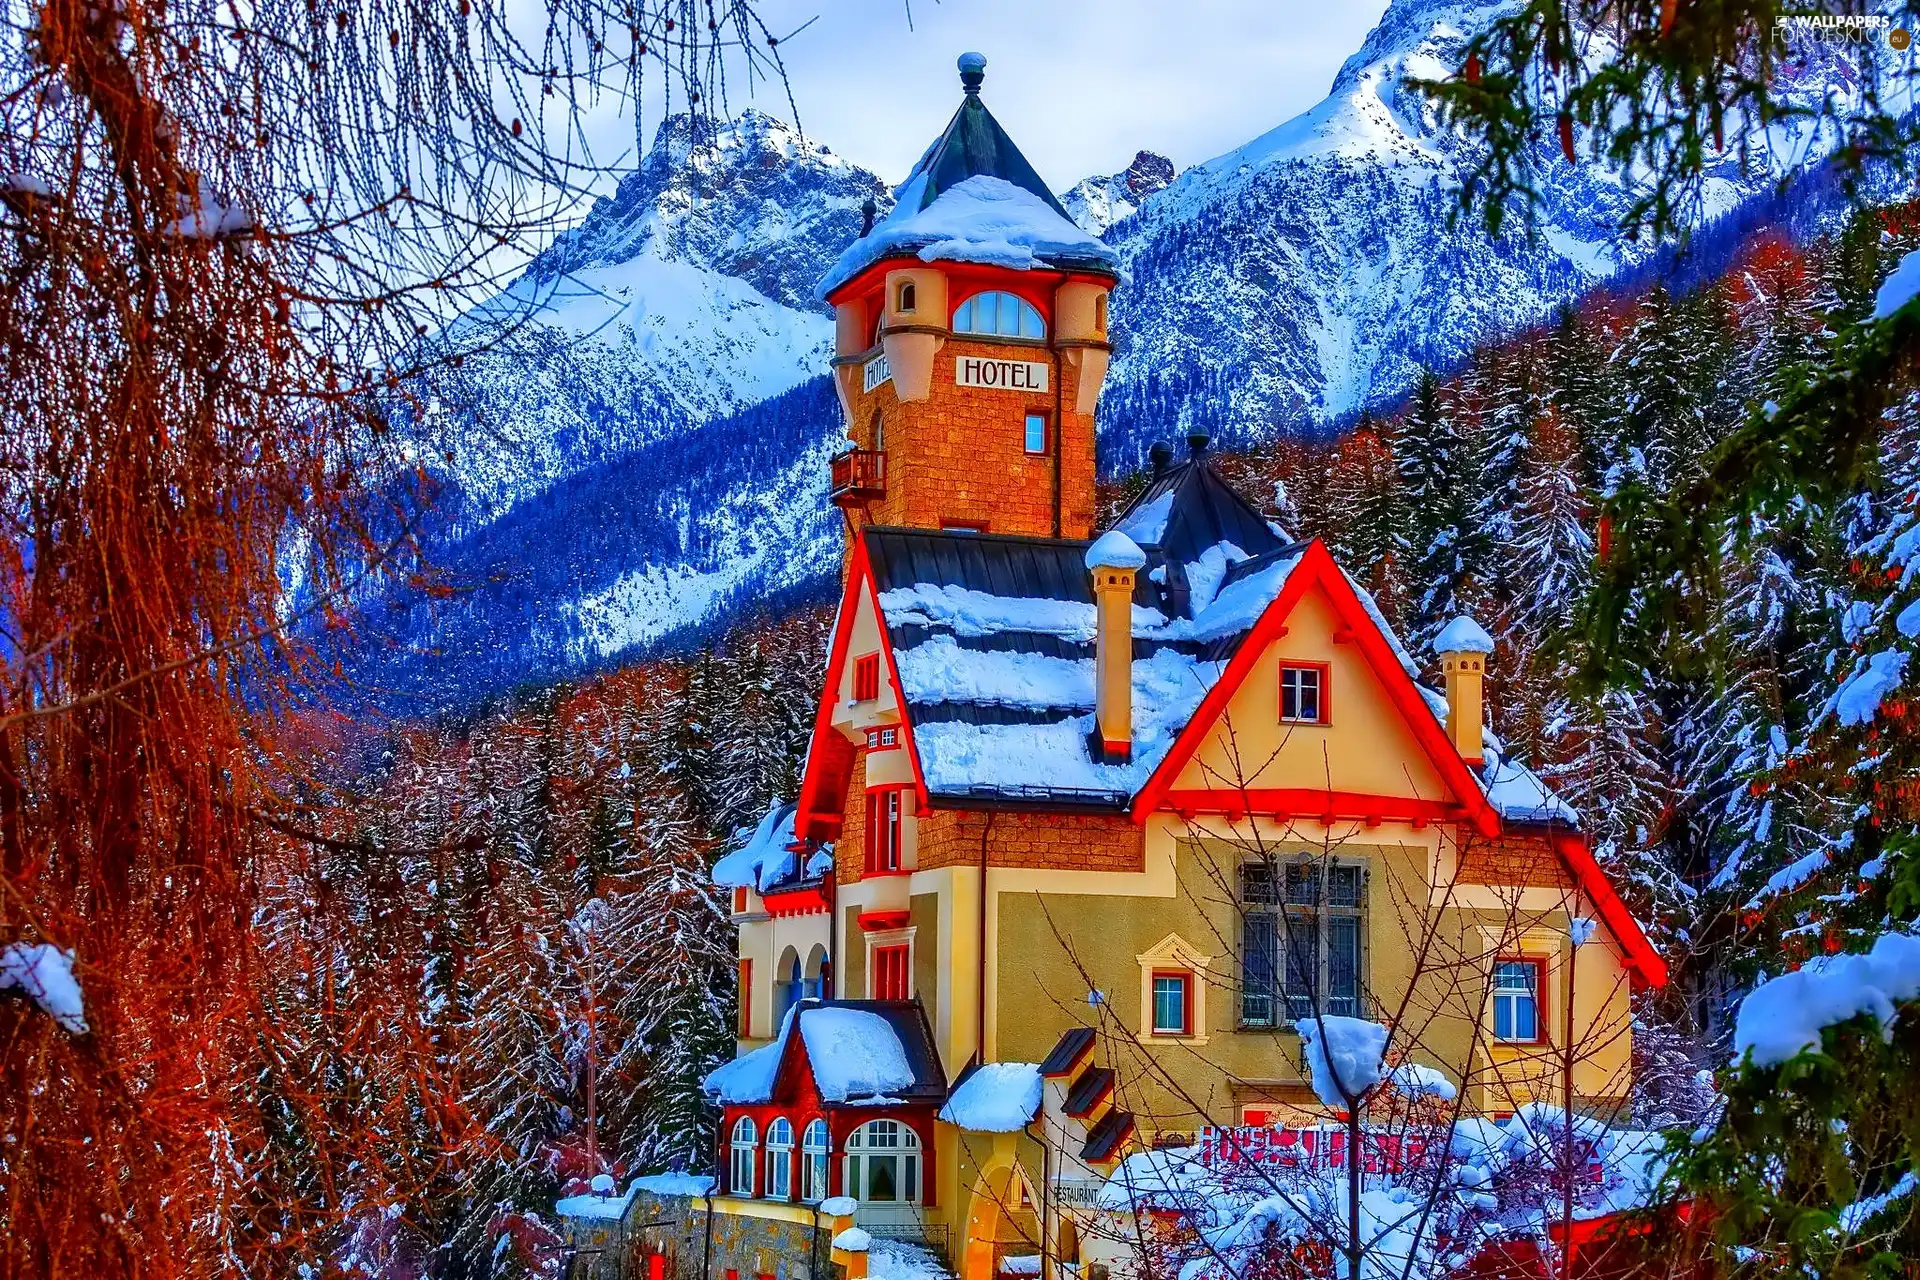 Hotel hall, winter, Mountains